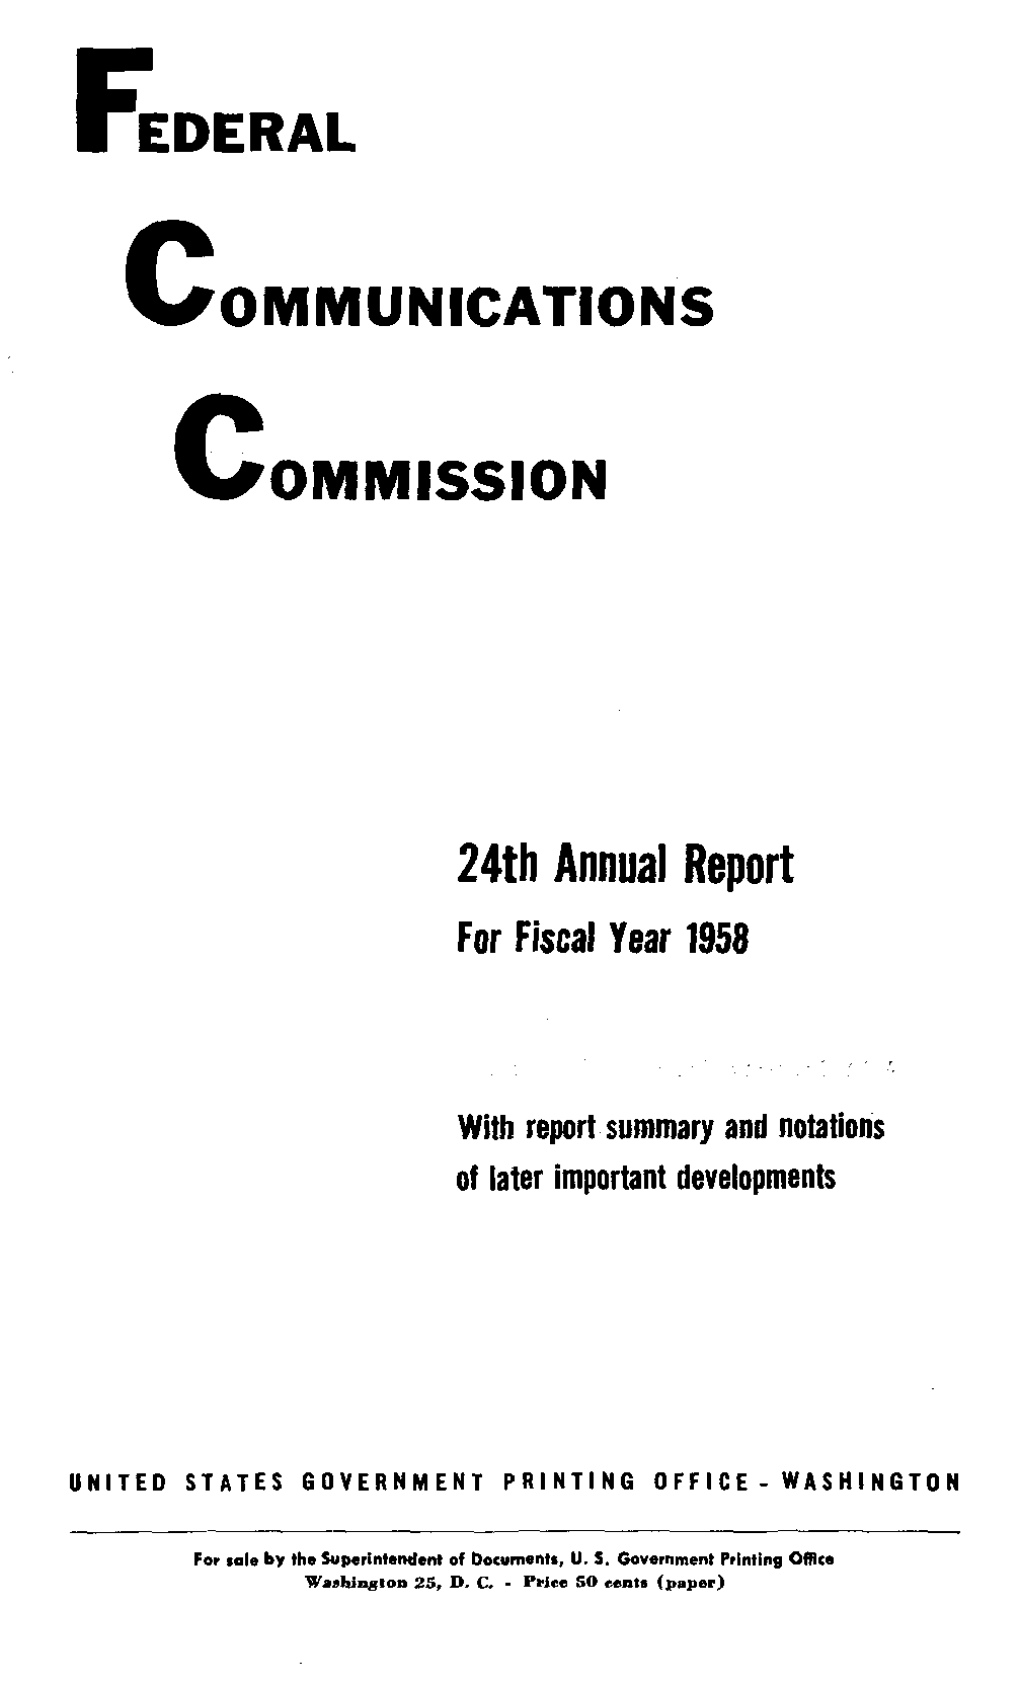 Federal Communications Commission (As of June 30,1958)